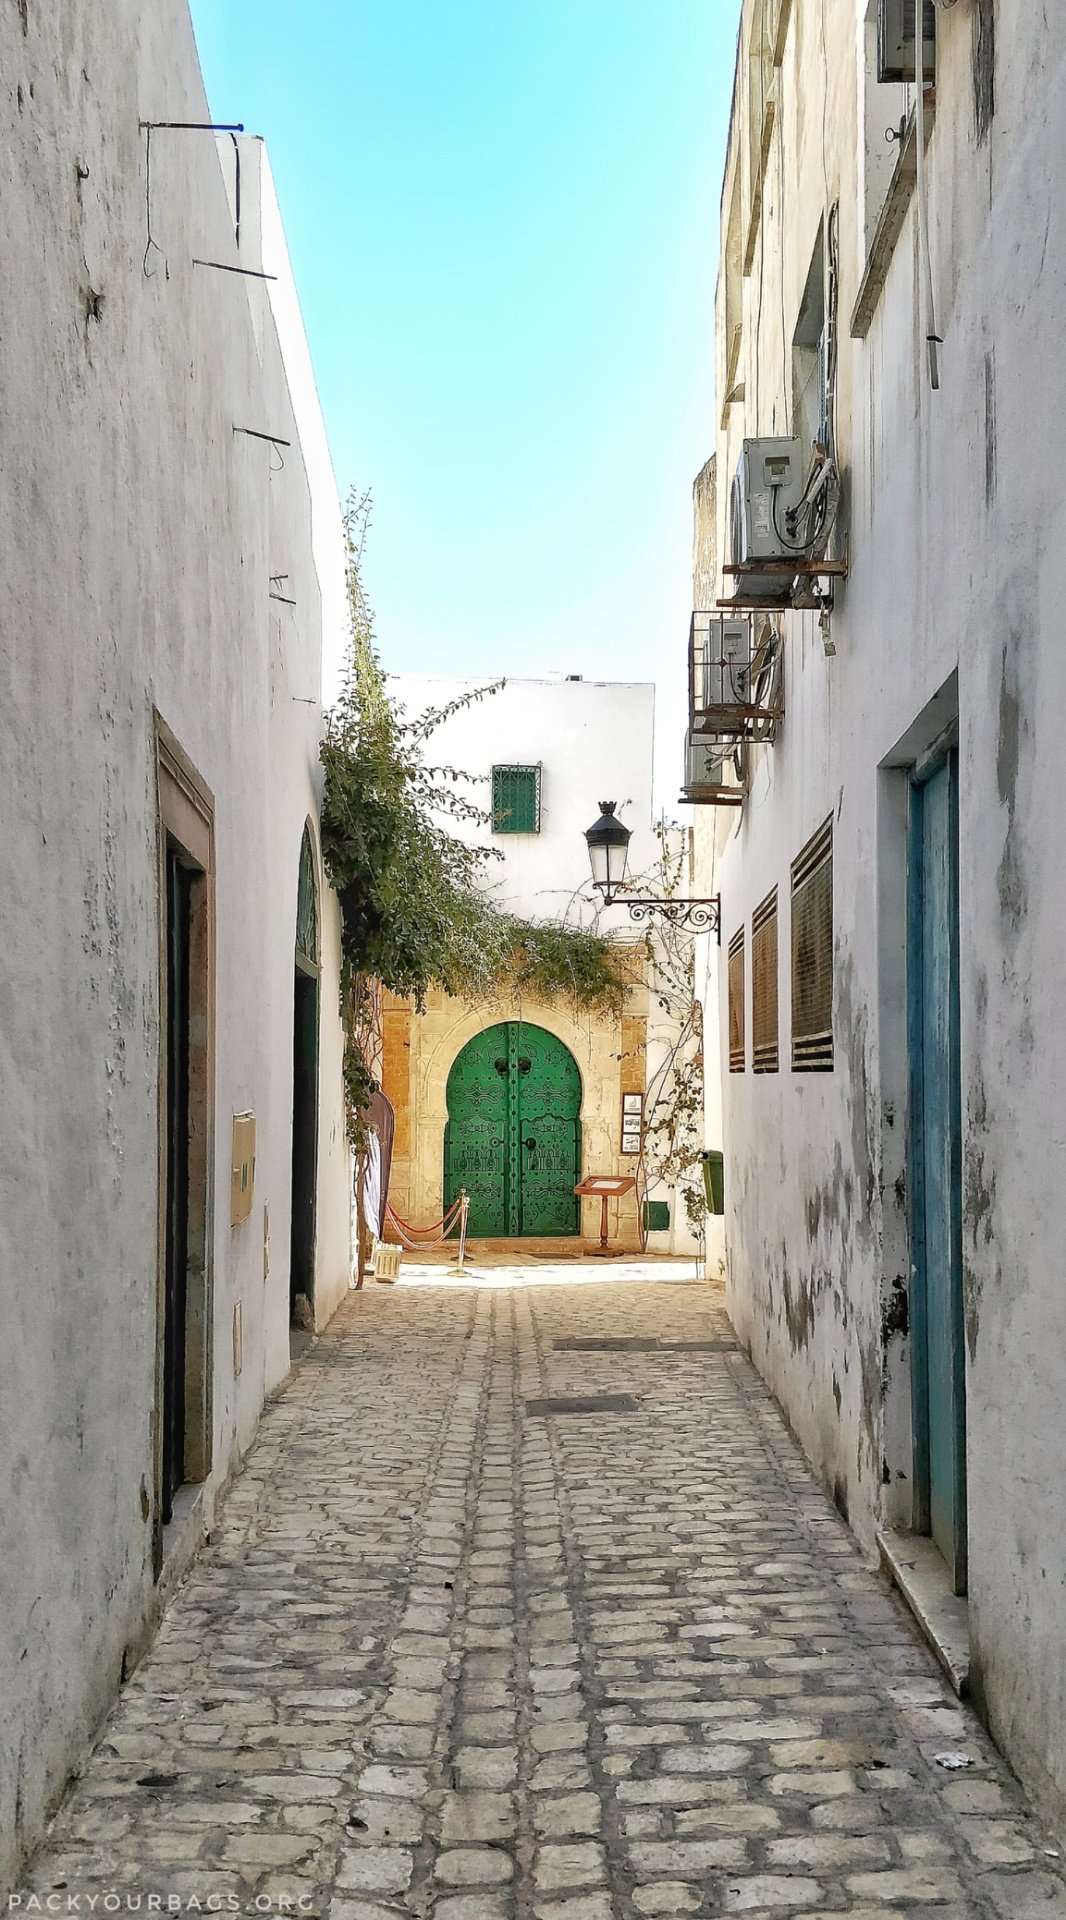 The Doors of Tunisia - Photo Essay - pack your bags